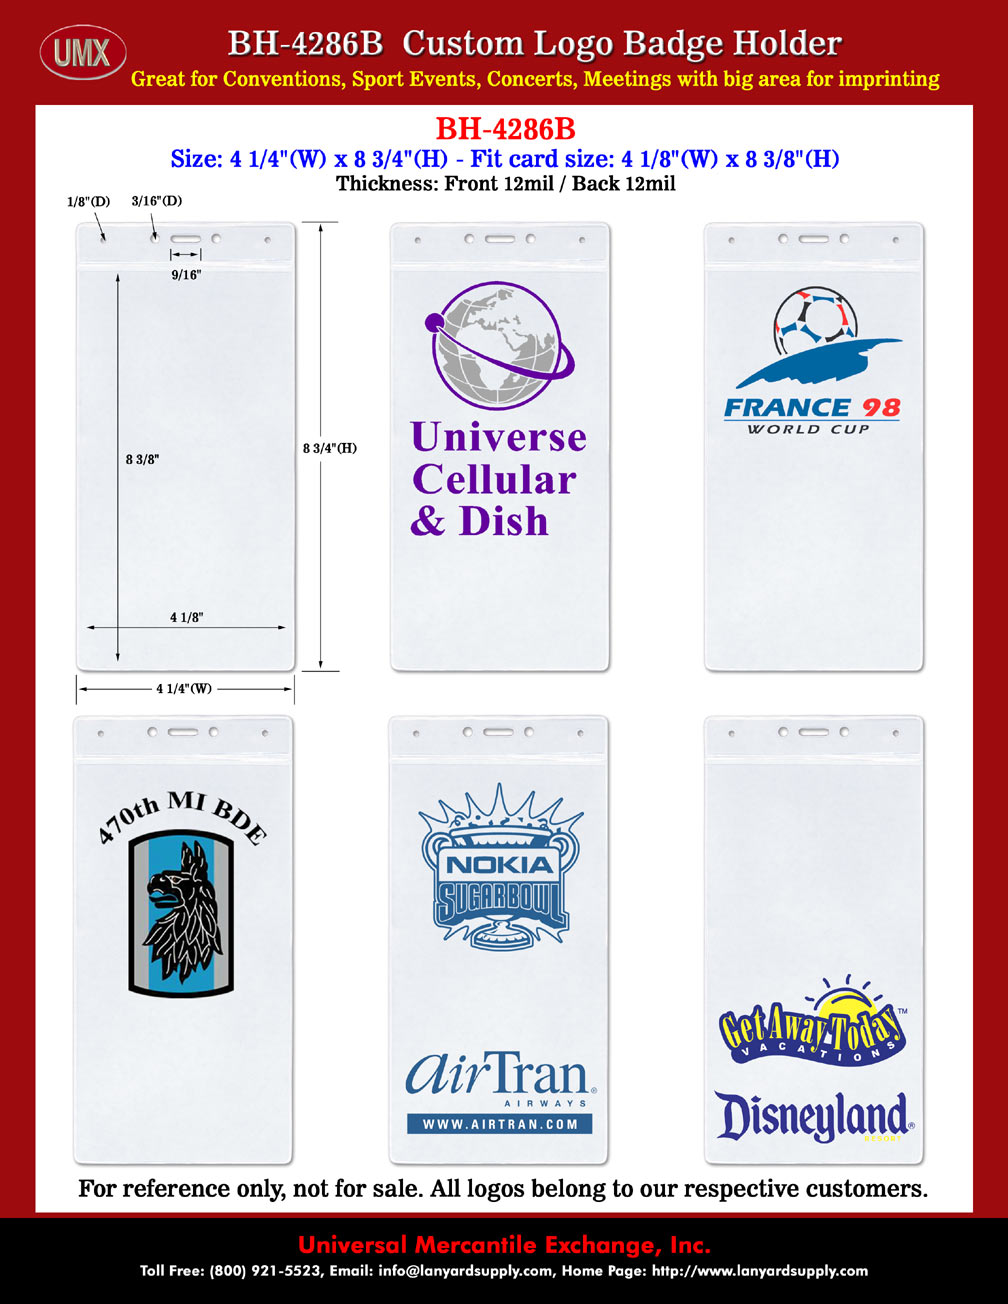 Custom Printed Large Size Event ID Holders: For Event Name Badges or IDs